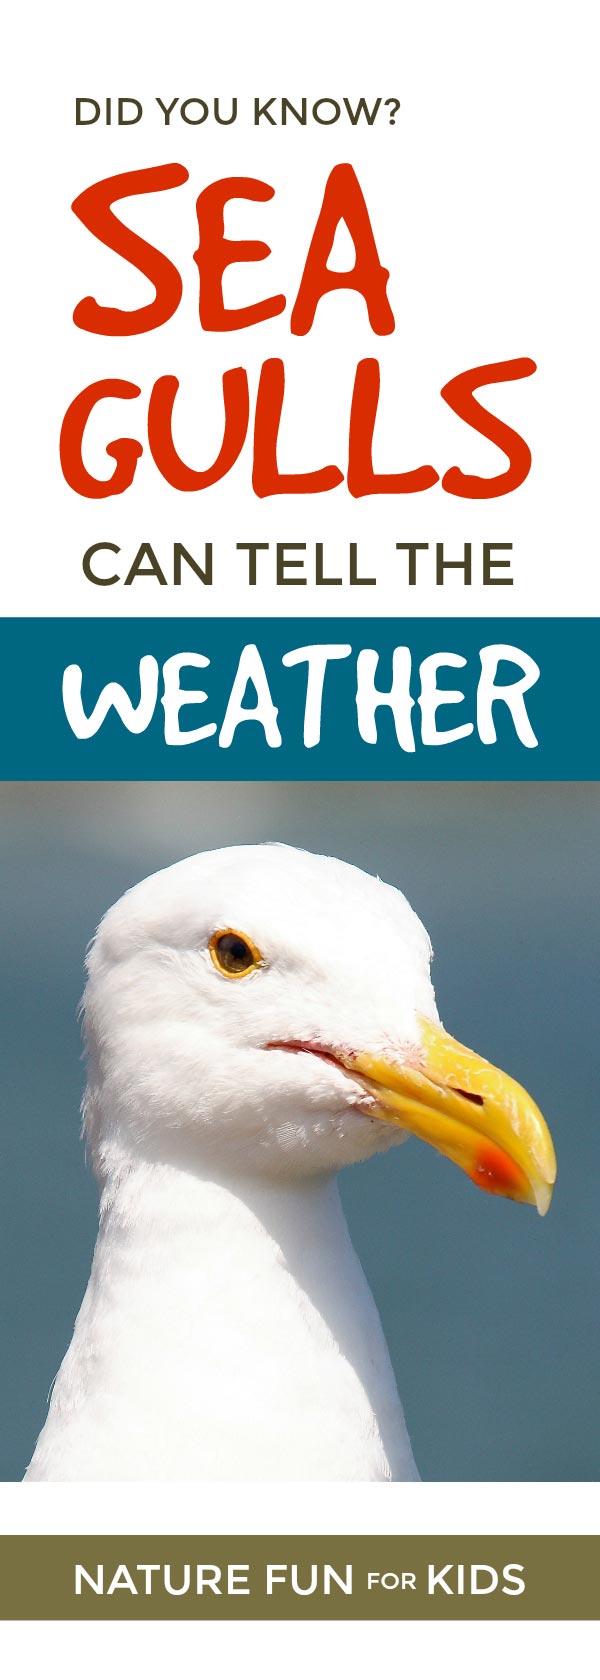 Did you know seagulls can tell the weather  ... #birds #nature 